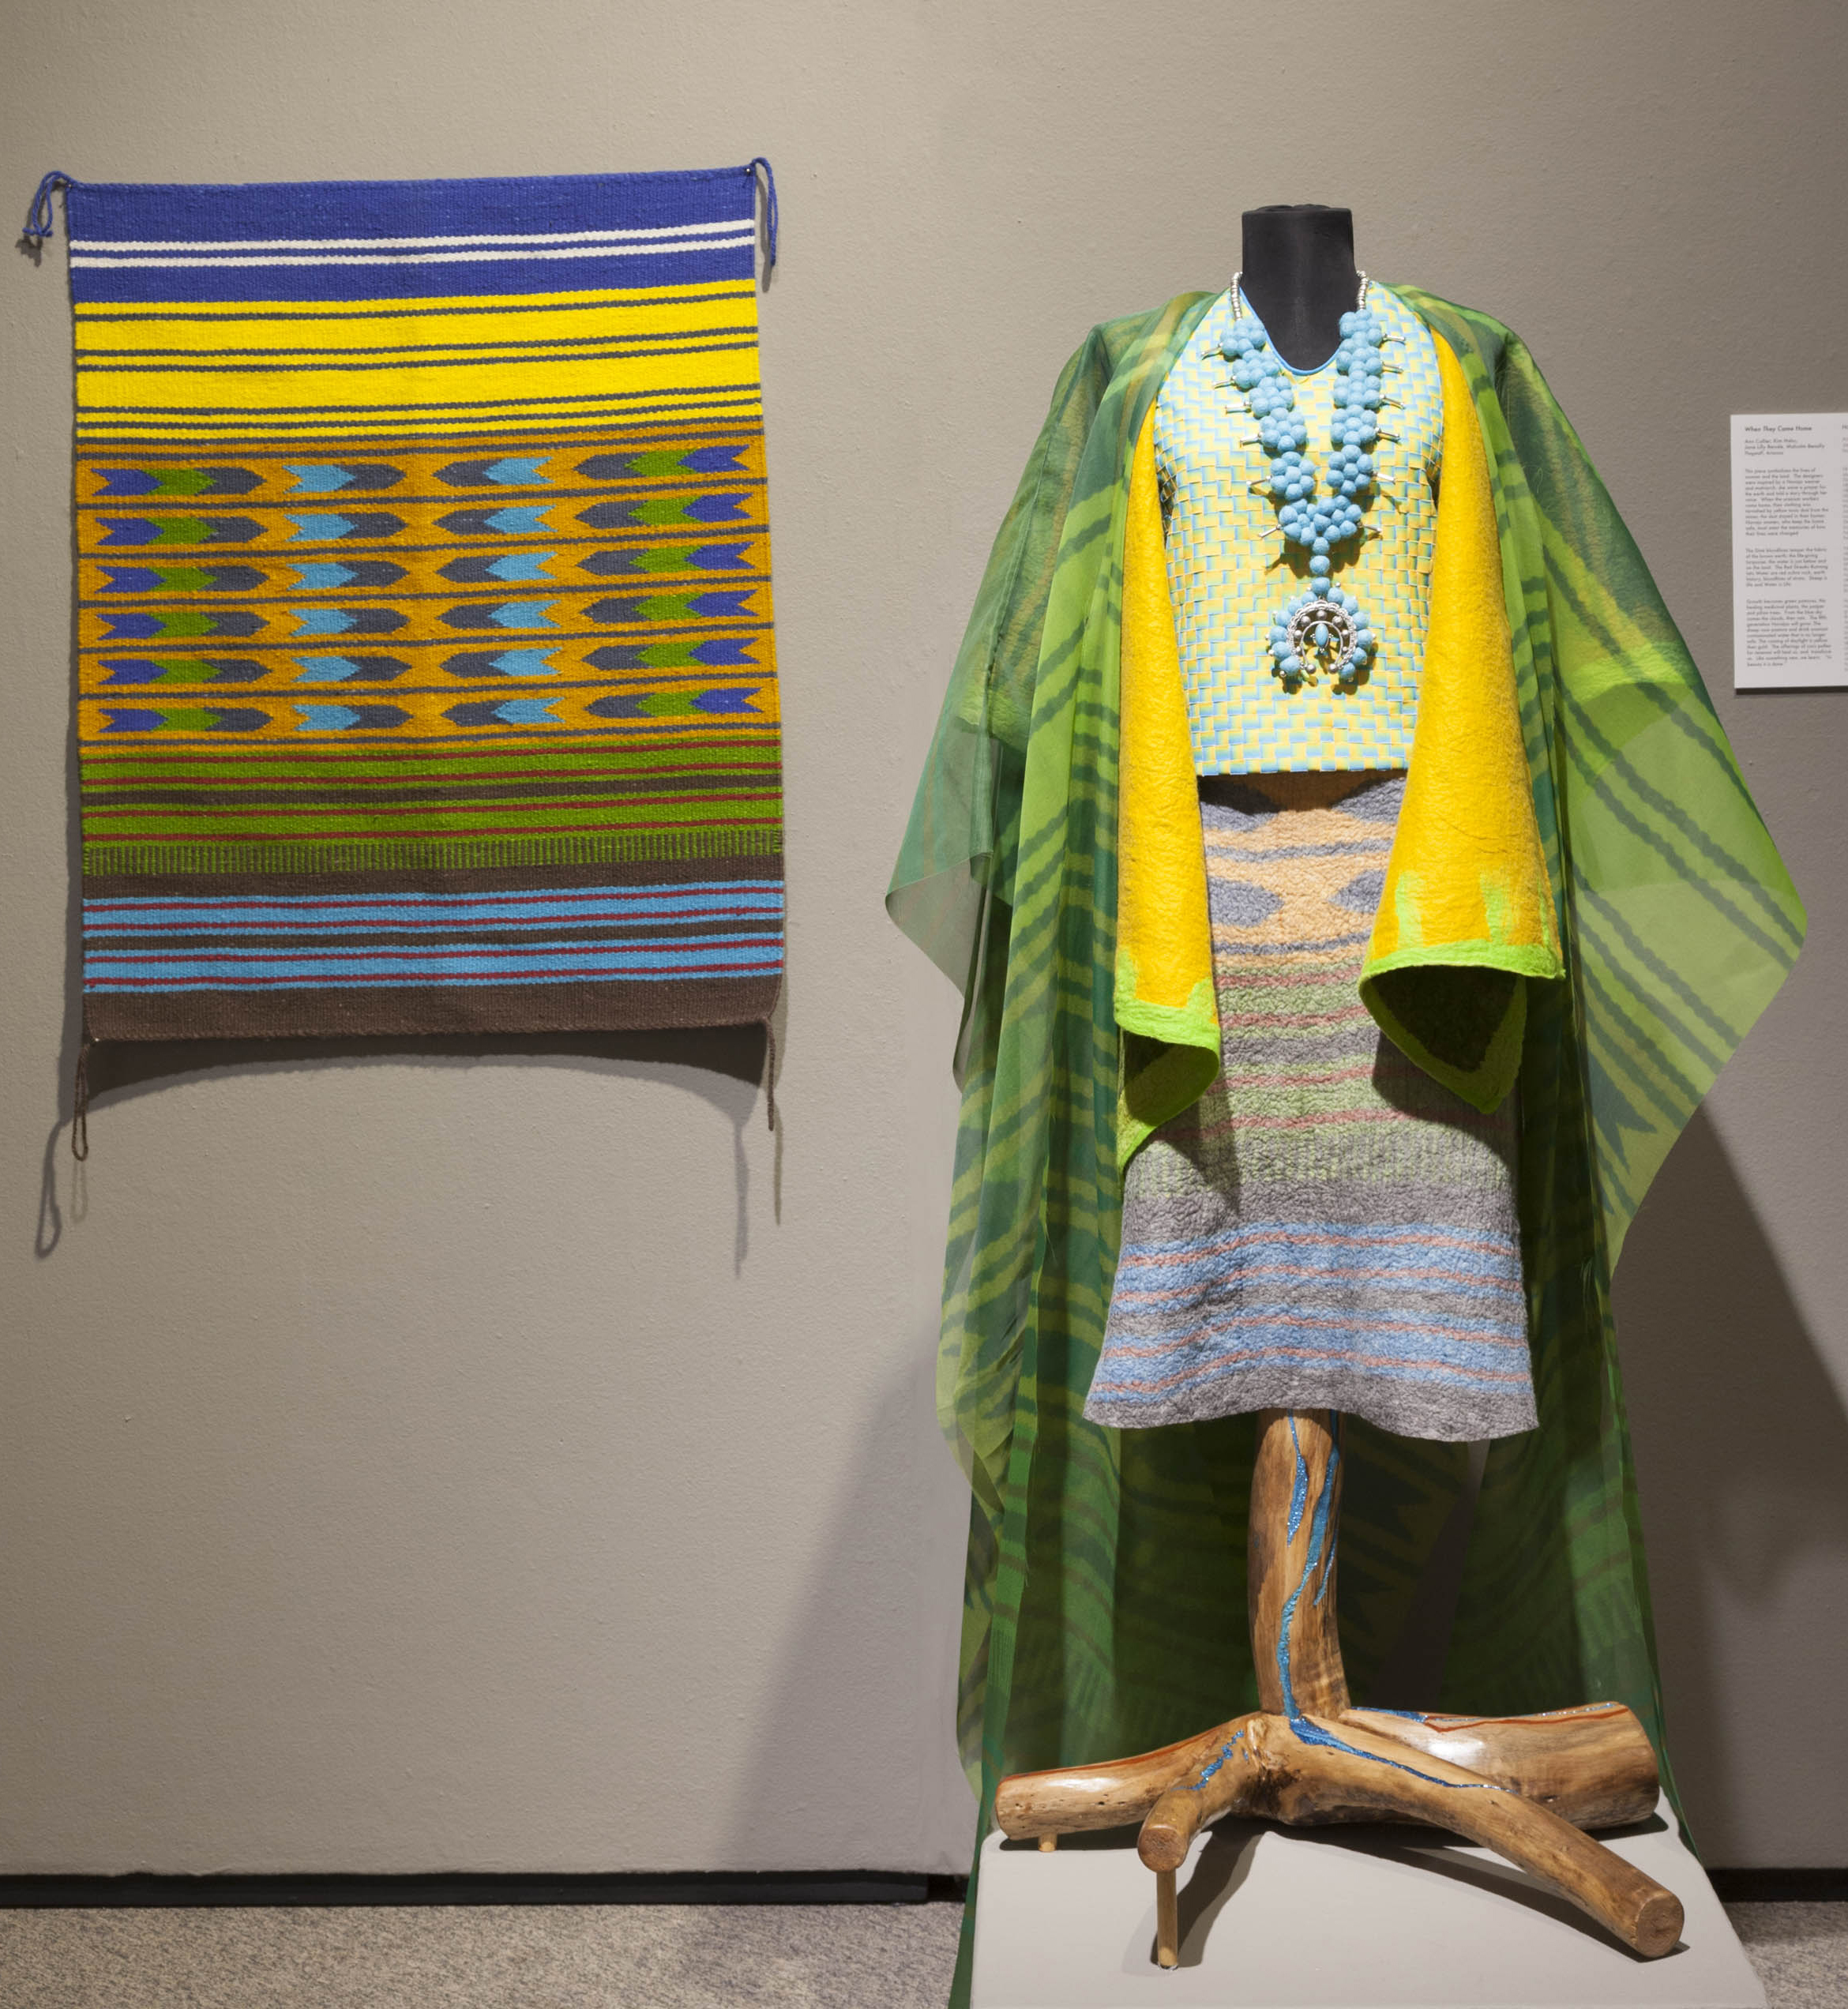 This photograph shows the artists’ works installed in a museum gallery. On the left, a wool rug with stripes of yellow, blue, green, orange, and brown hangs on a wall. To the right is a headless mannequin, dressed in clothing inspired by traditional Navajo designs: a skirt, blouse, cape, shroud, and necklace, all in colors similar to those of the rug.